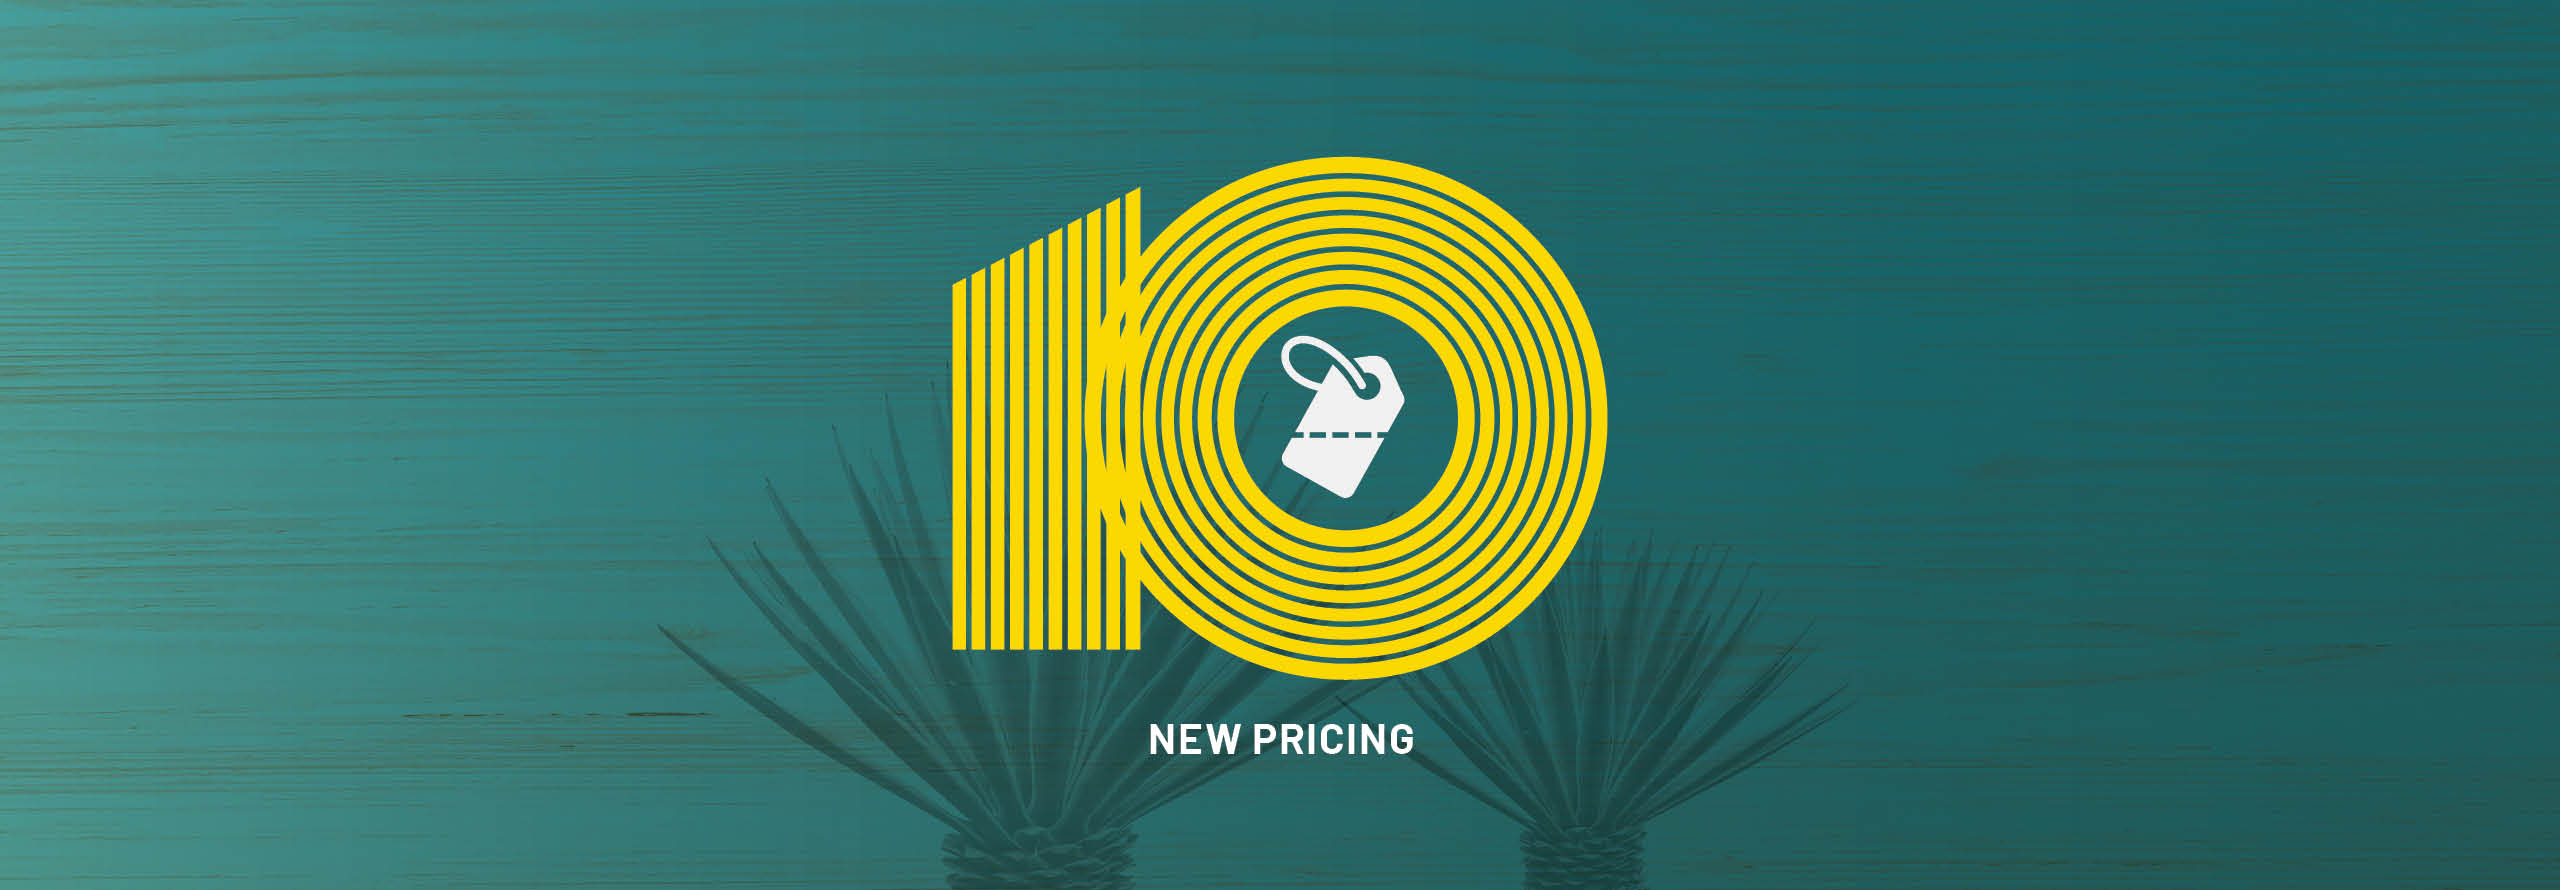 New Pricing Image